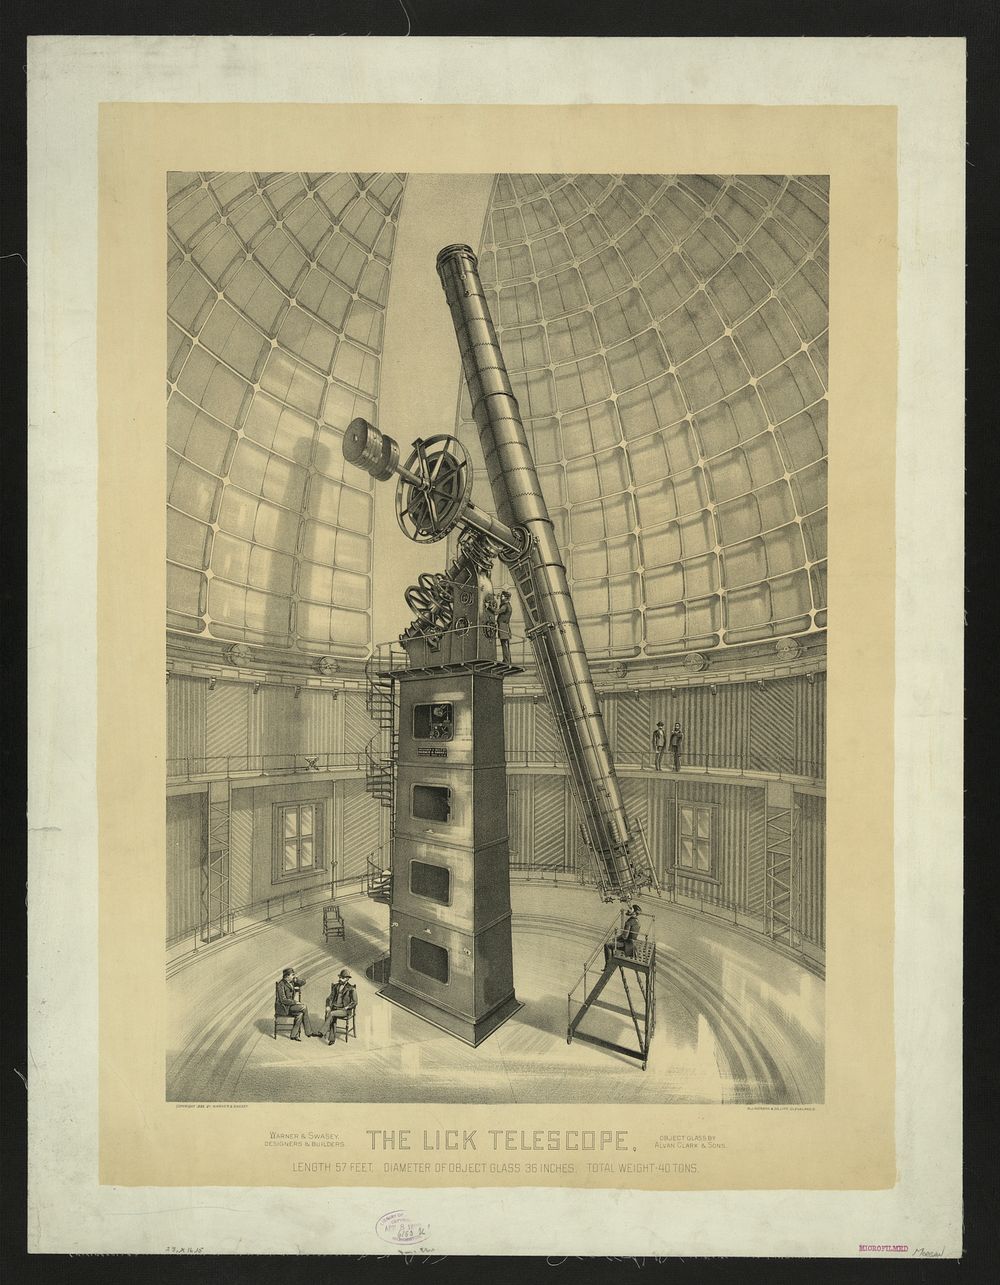 The Lick telescope, length 57 feet, diameter of object glass 36 inches, total weight 40 tons / W.J. Morgan & Co. Lith.…